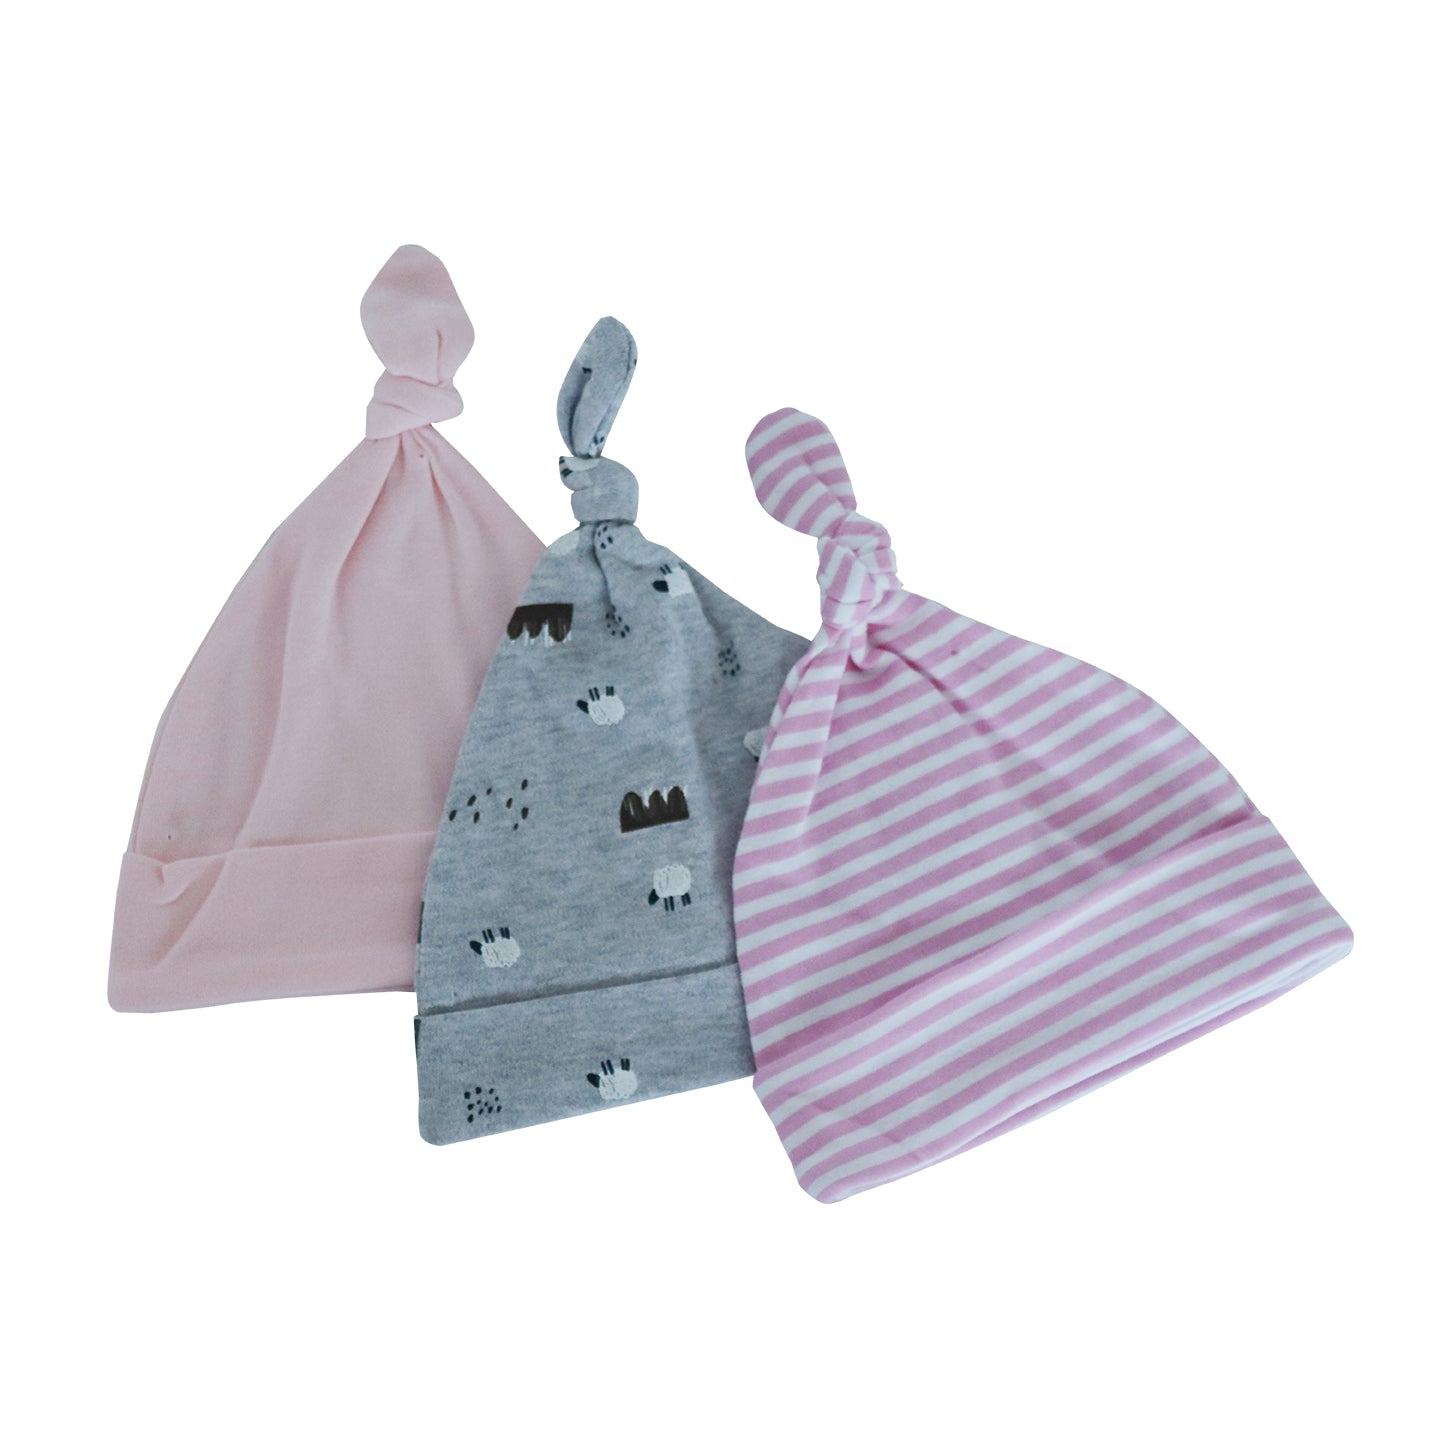 Snuggletime 6-Piece Gift Set - 3 Hats and 3 Mittens